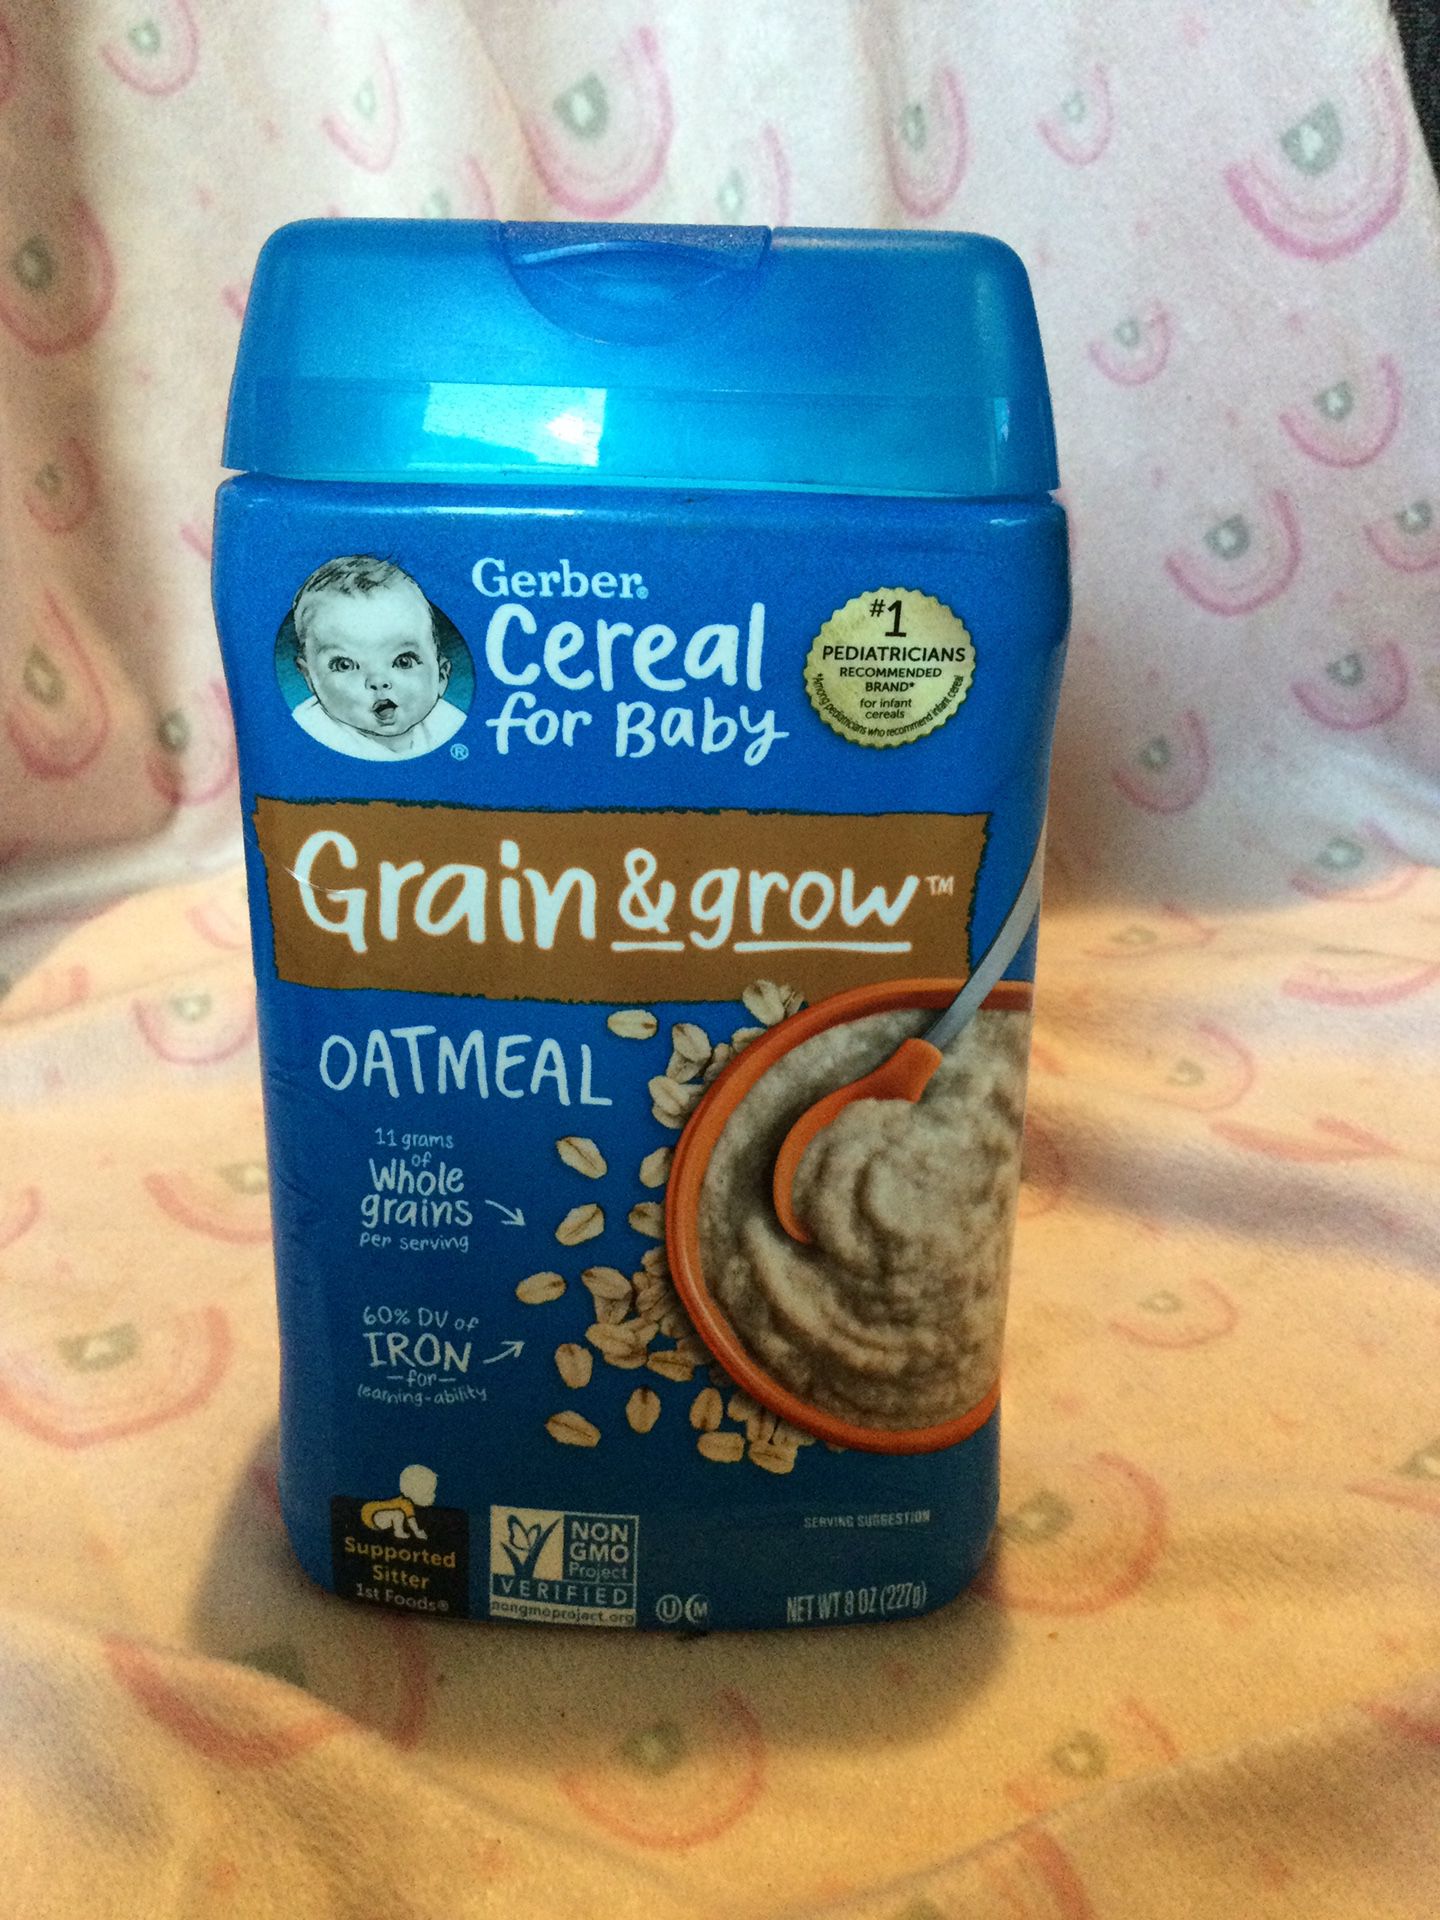 Gerber Cereal For baby Oatmeal (Supported Sitter)